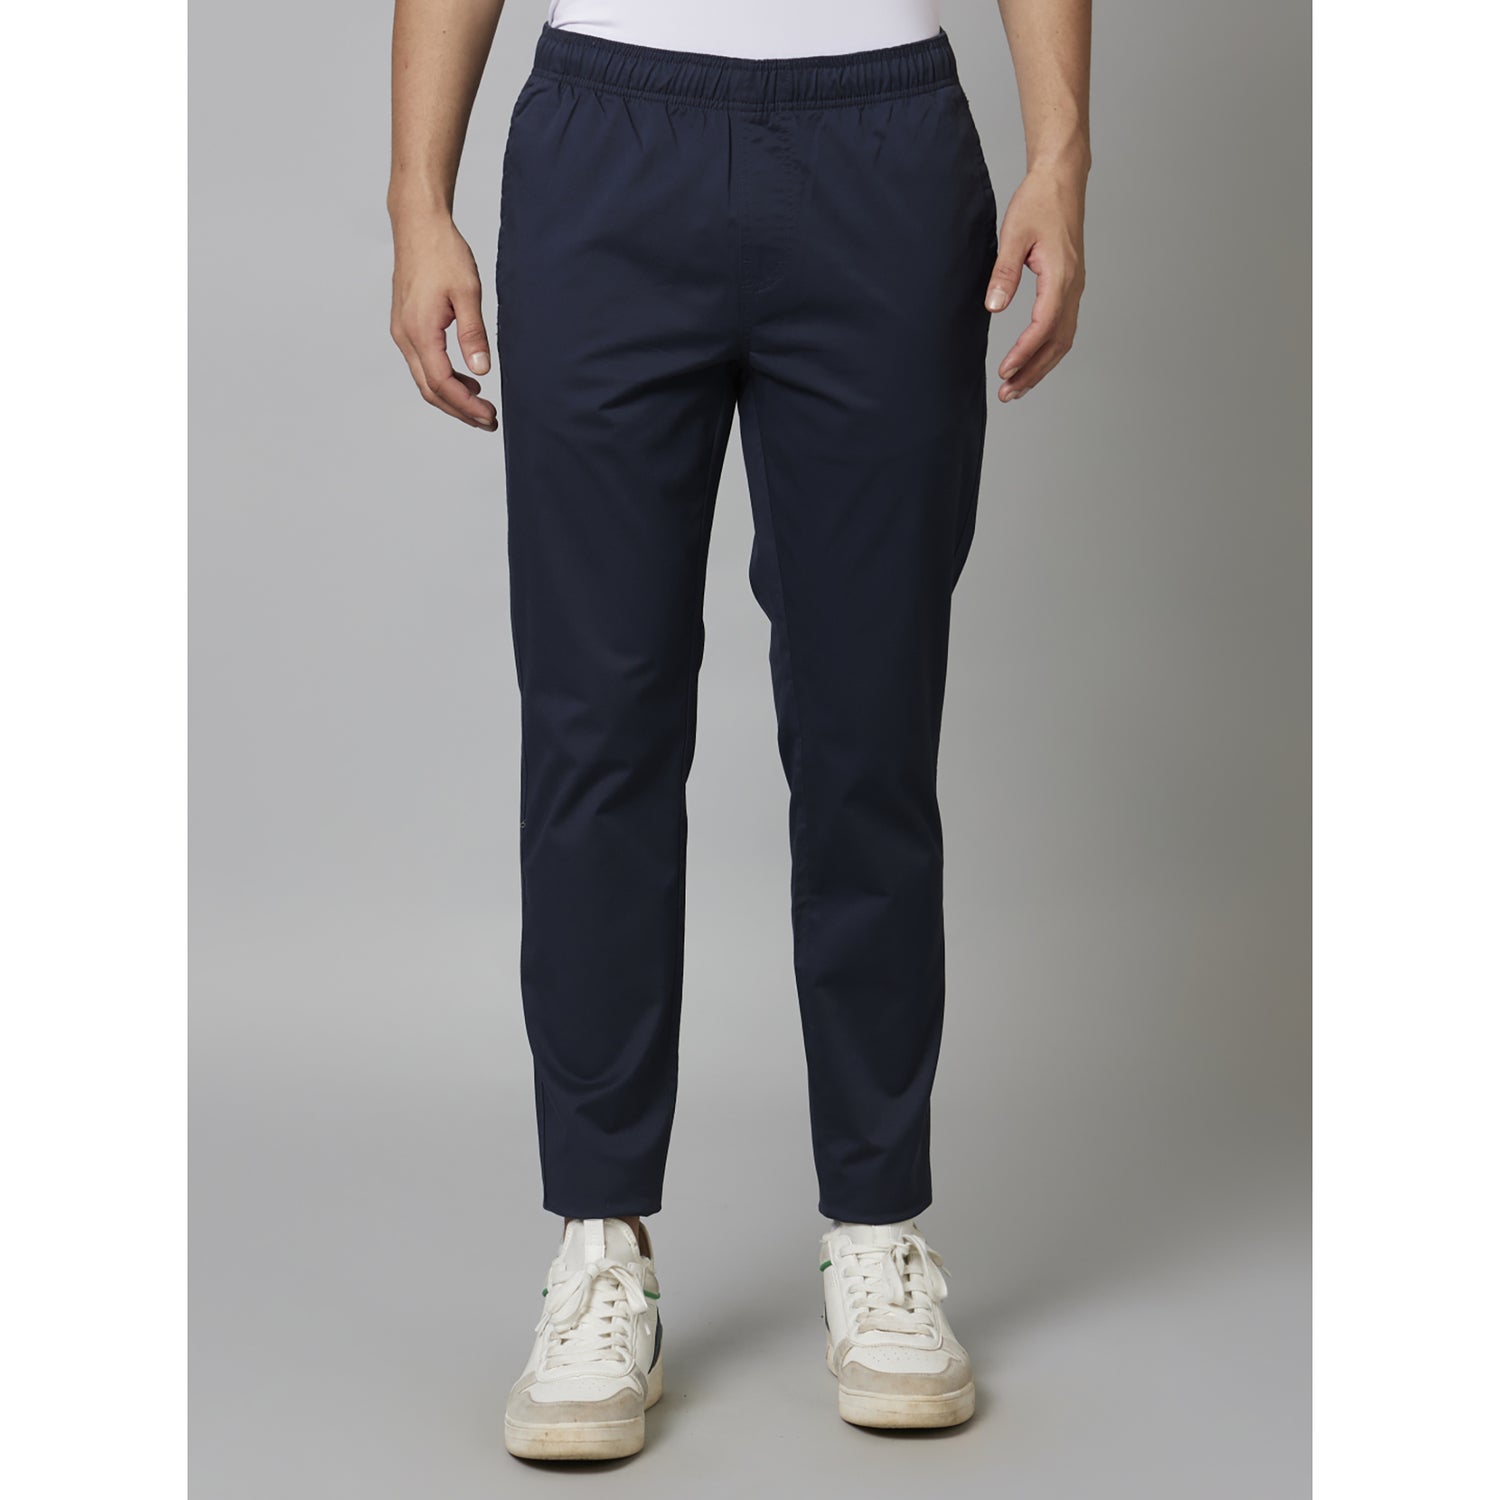 Navy Solid Cotton Poly Blend Trousers (DOMAX5)